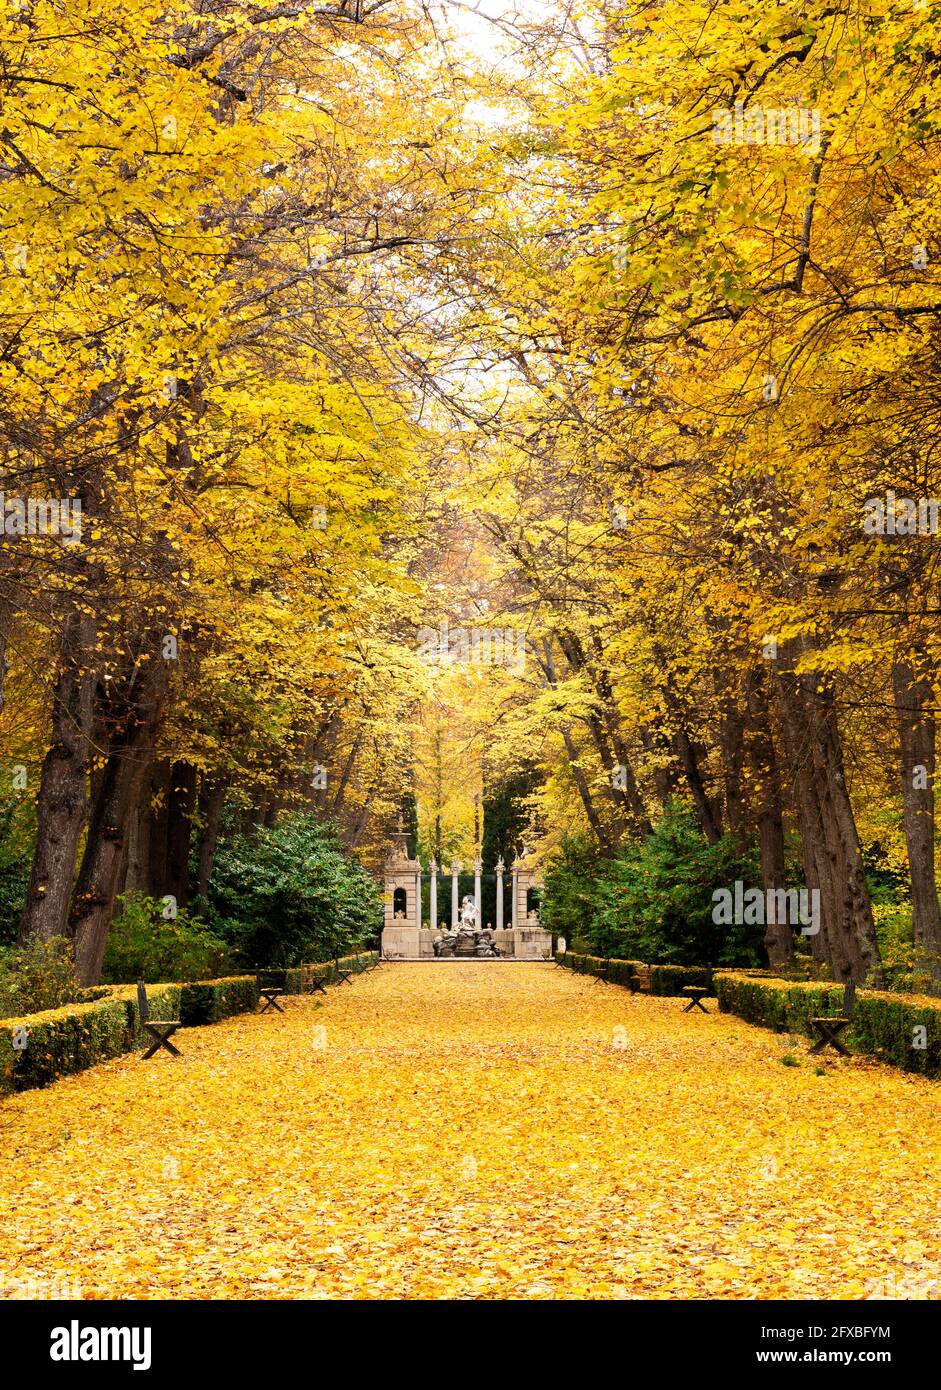 Walk of linden trees with the fallen leaves on the ground with strong golden, yellow and orange colors and at the bottom of the walk an ornamental fou Stock Photo